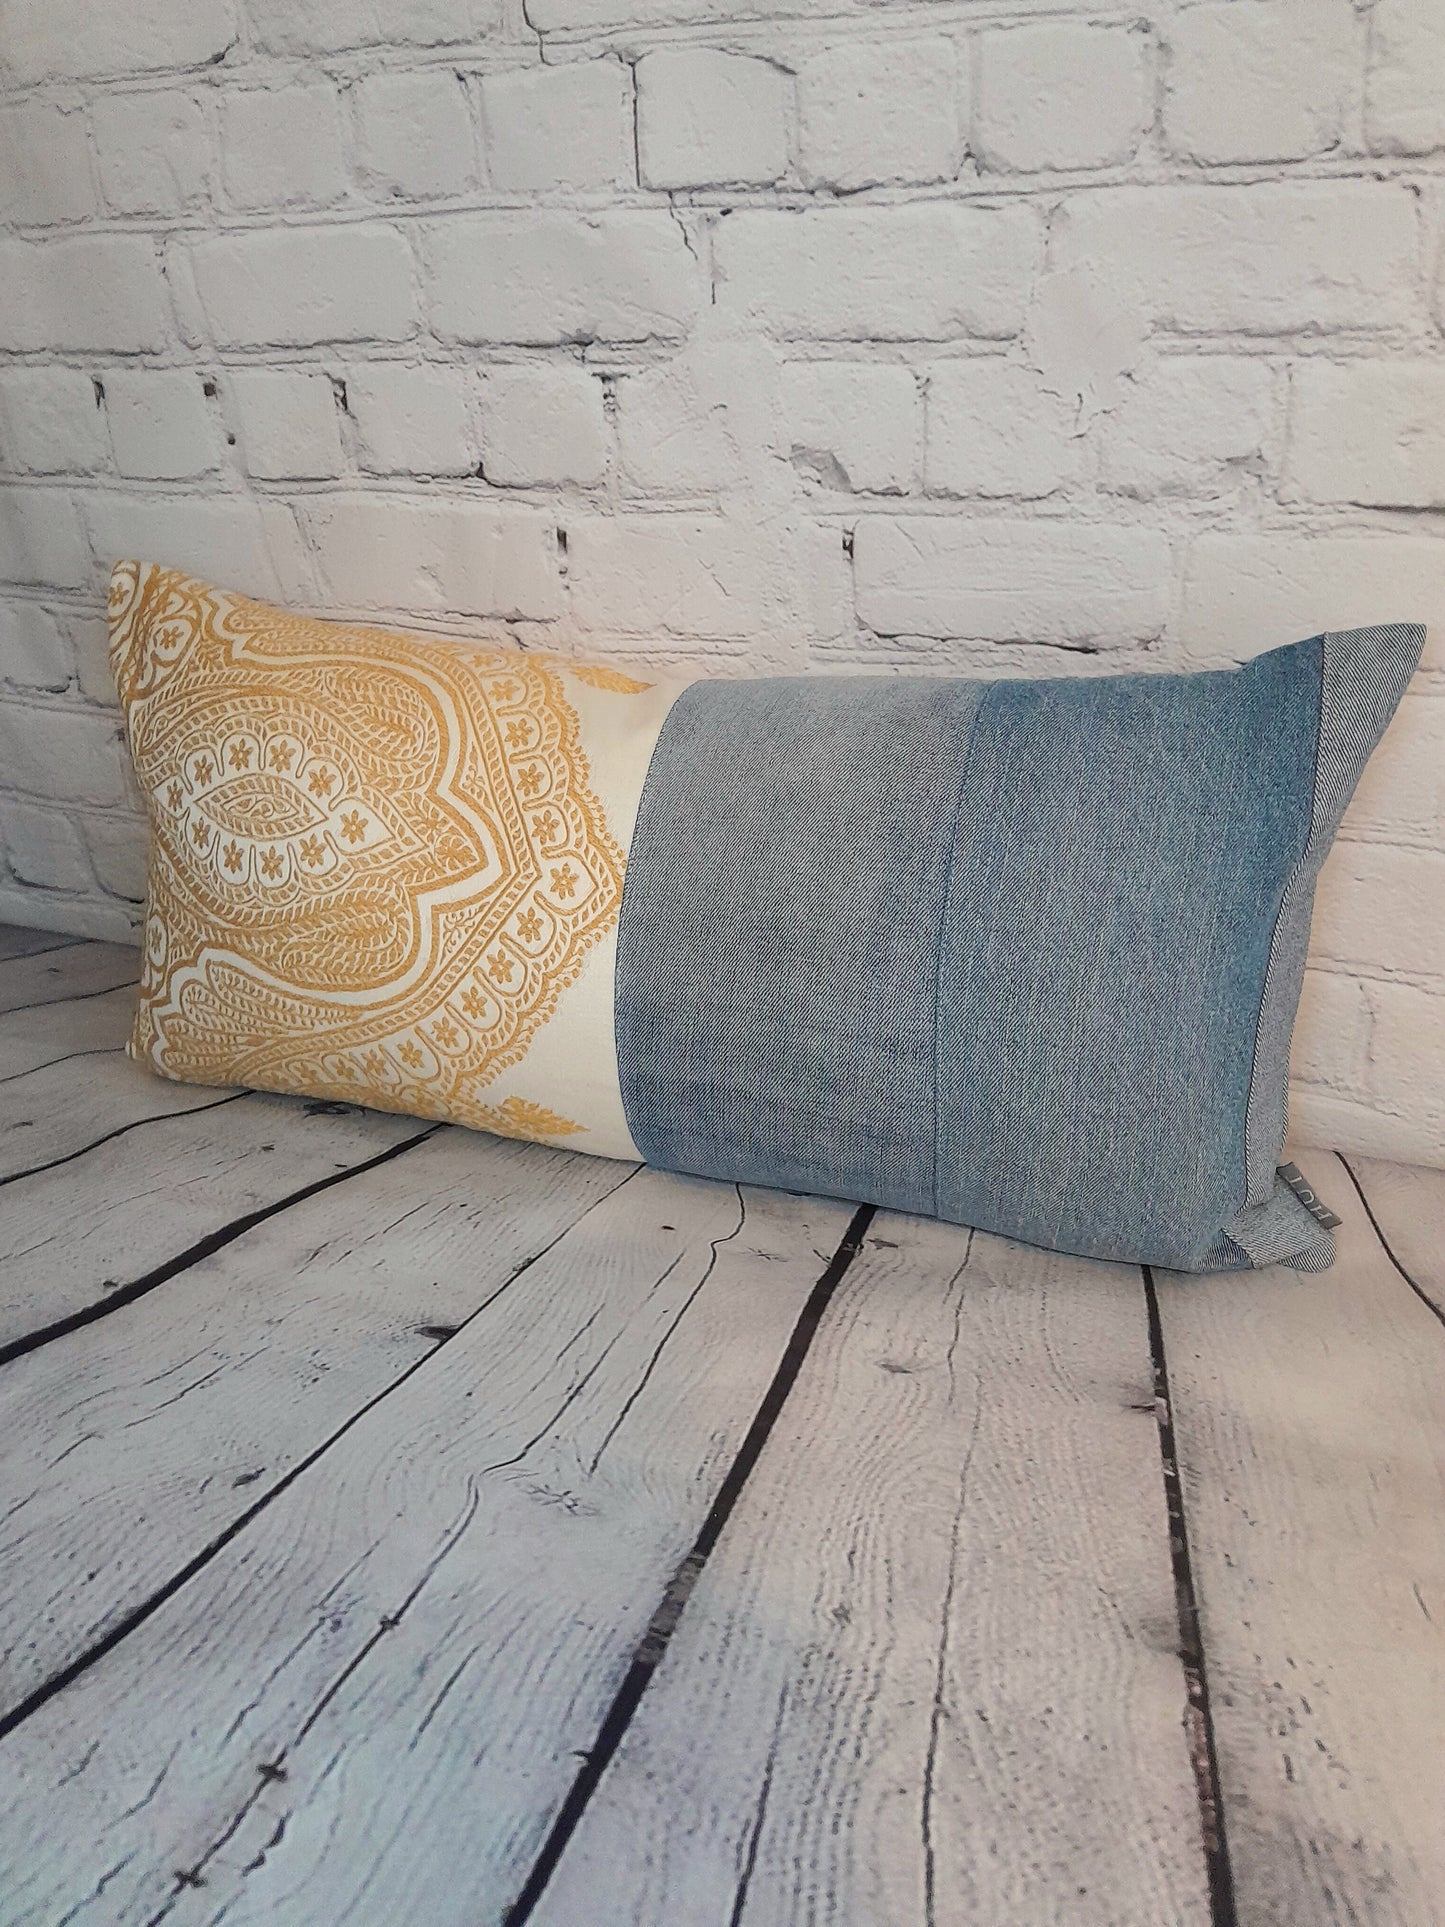 luxury unique boho pillow cushion made from repurposed denim jeans and embroidered furnishing fabric